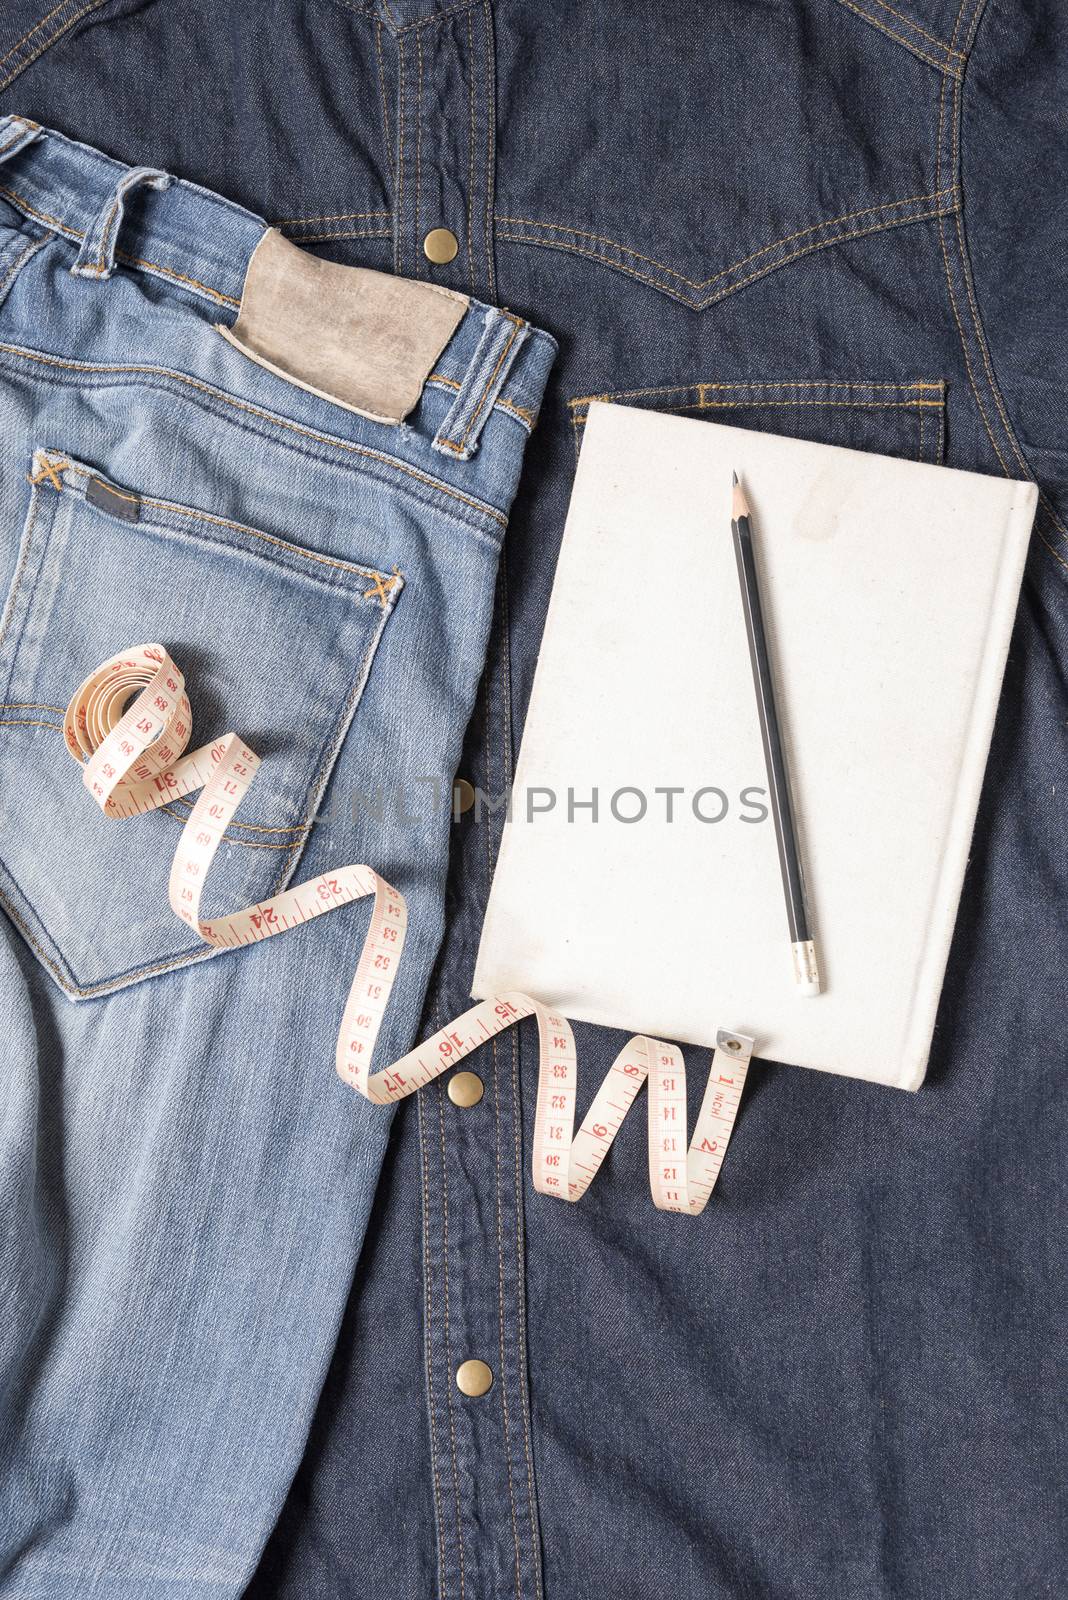 measuring tape and notebook with jean